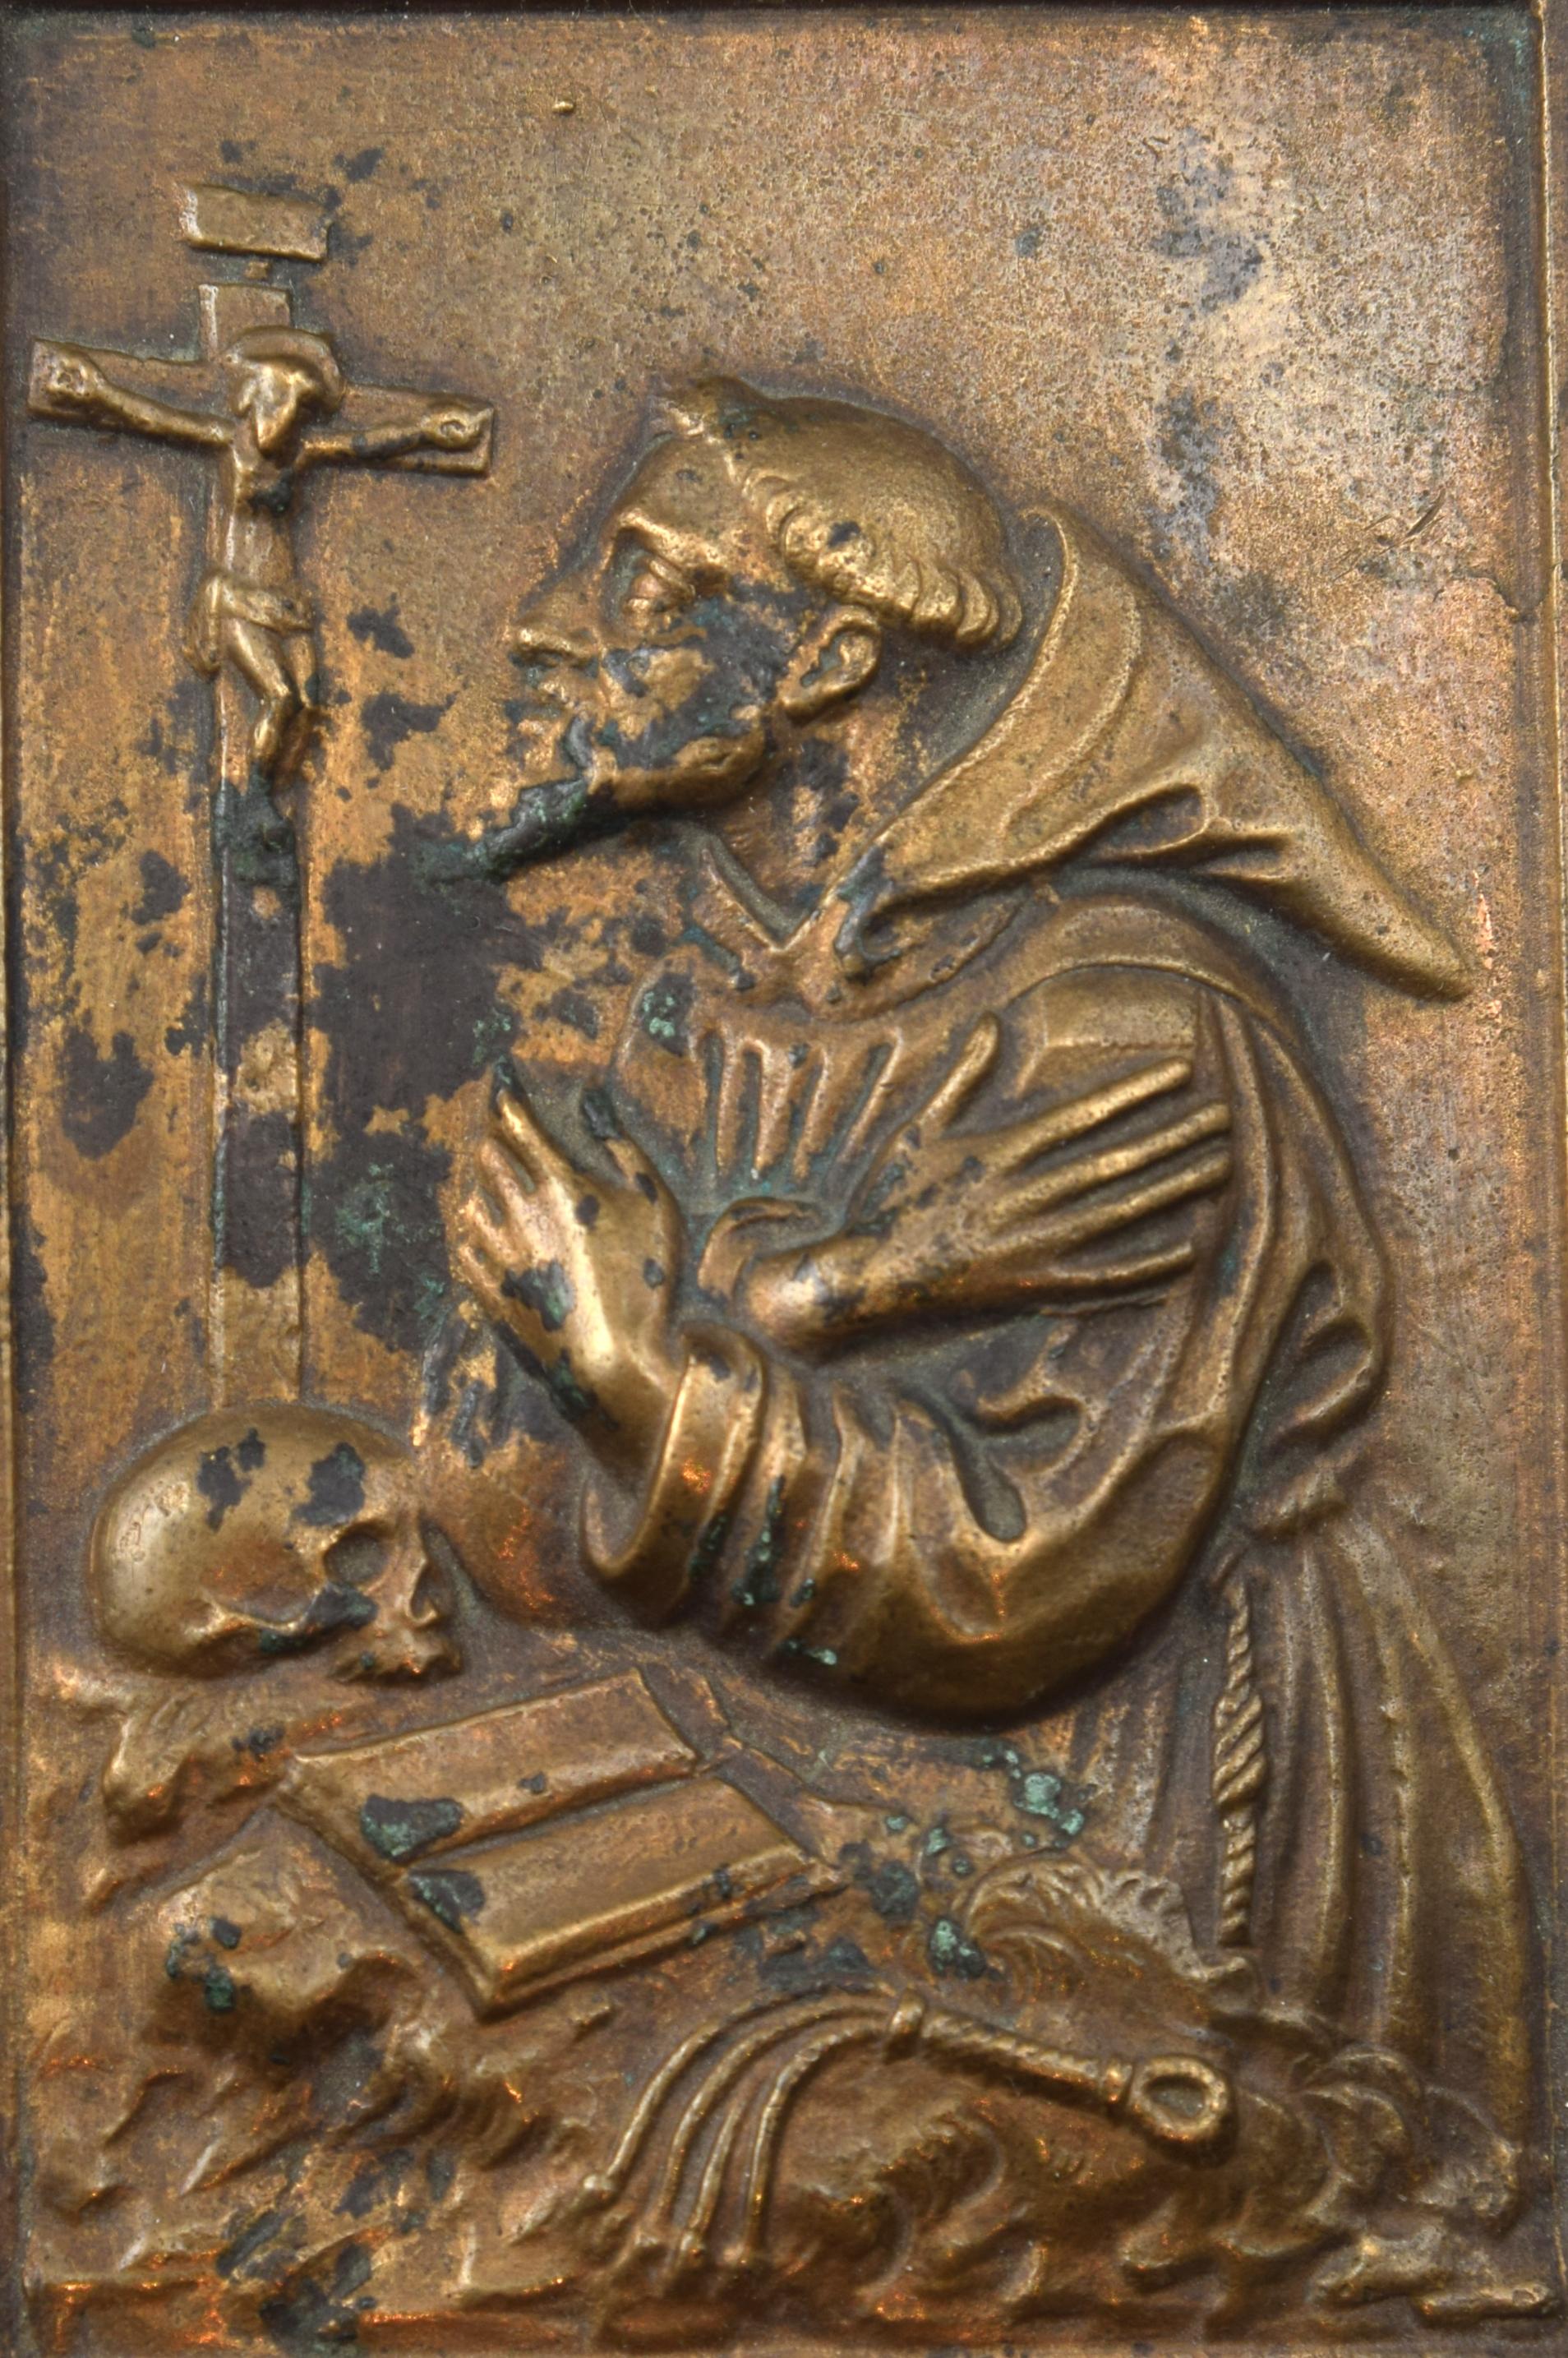 Baroque Bronze Devotional Plaque, St Francis of Assisi, 17th Century